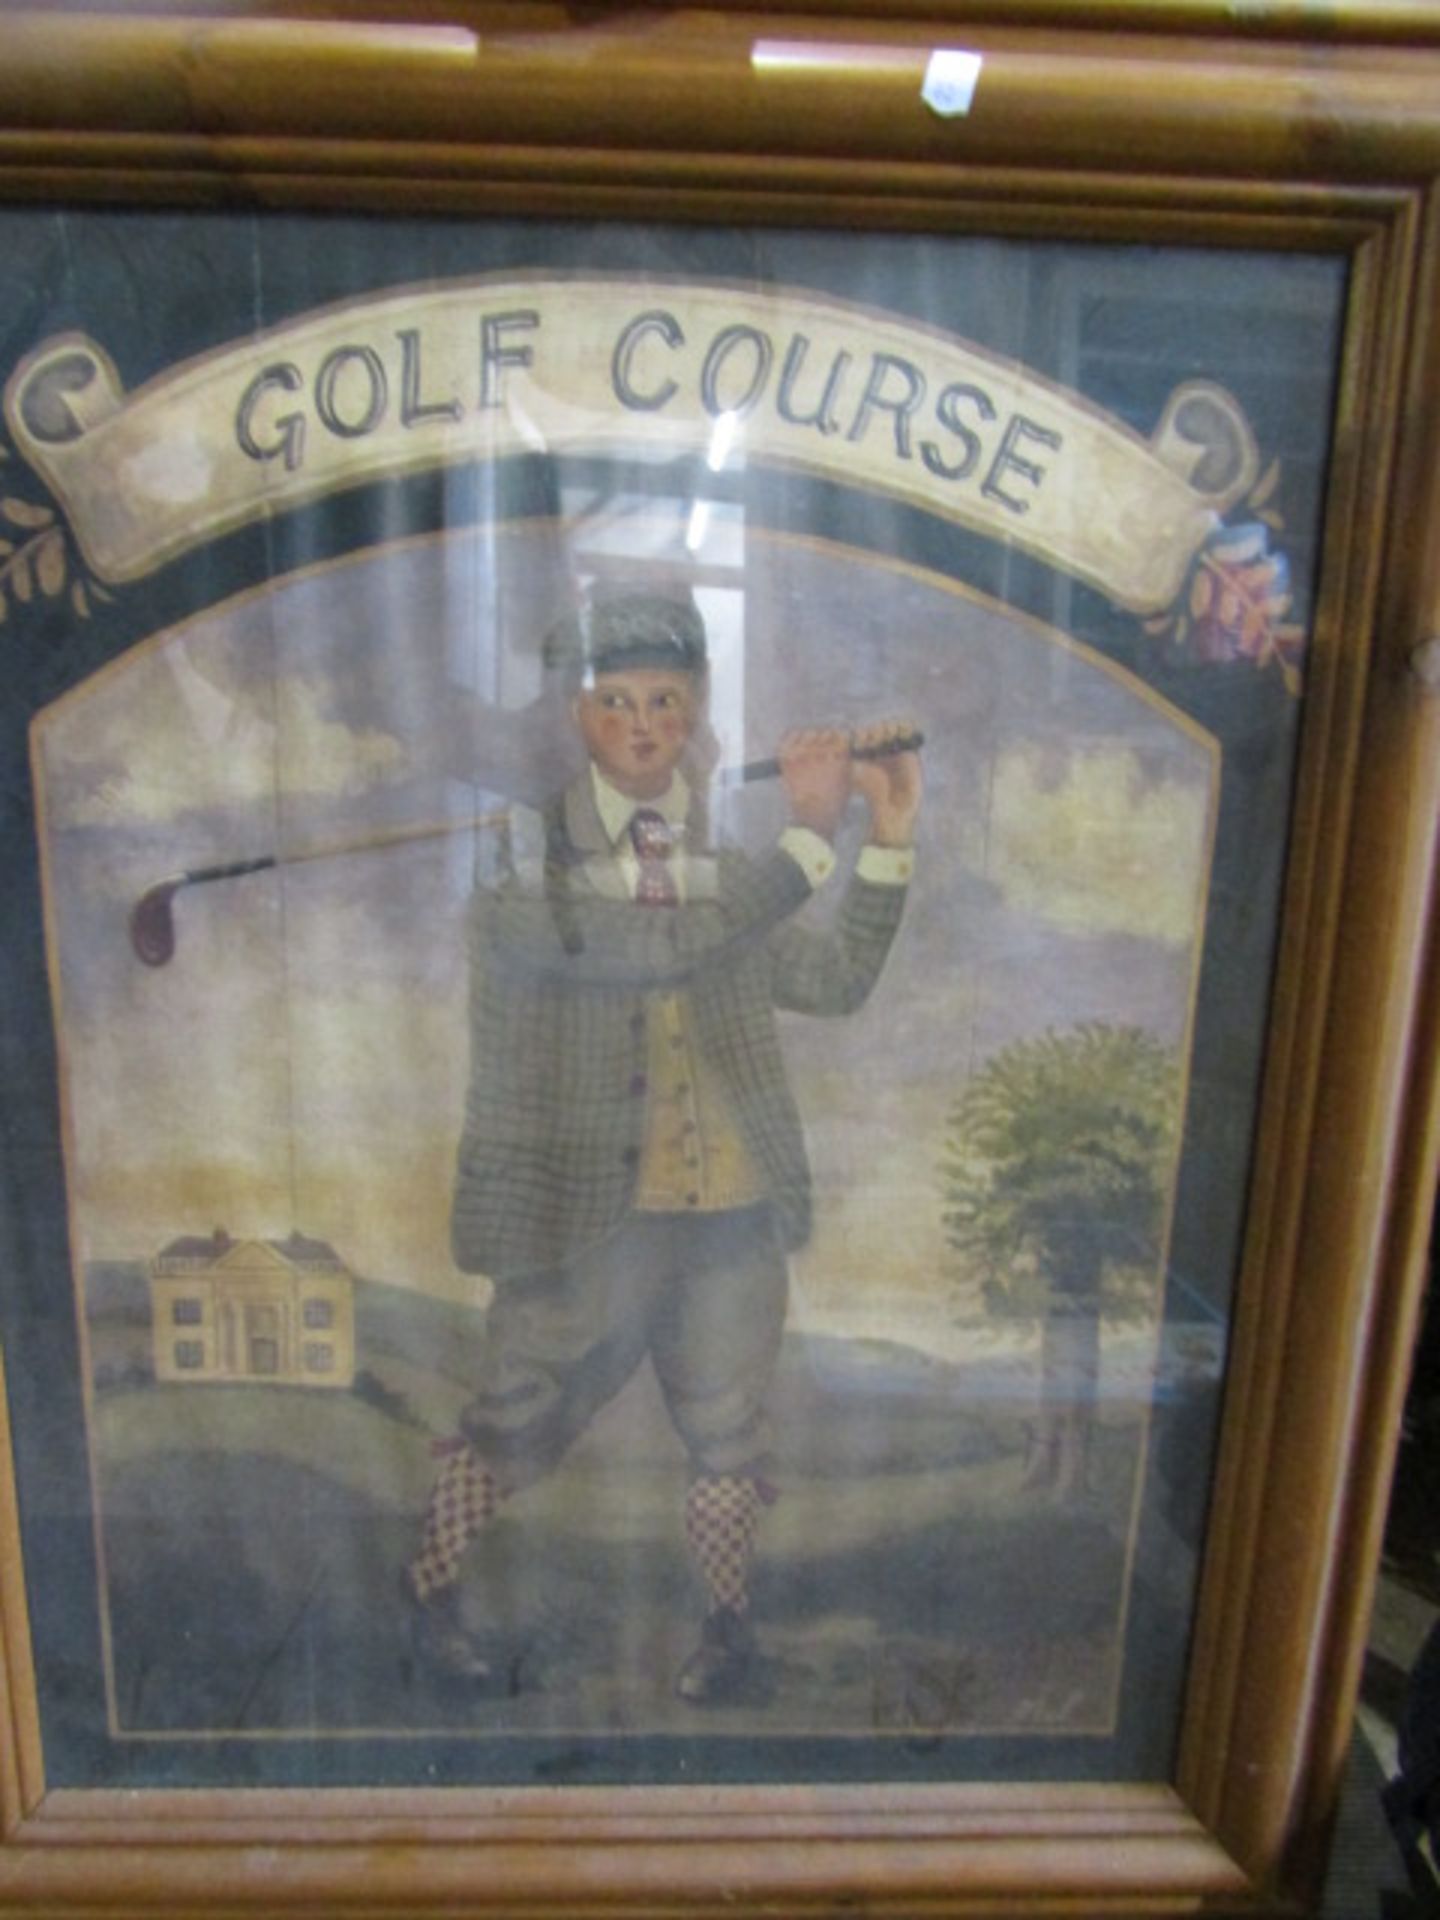 Golf picture, Eggs sign, skinny cook sign and a plane picture - Image 2 of 4